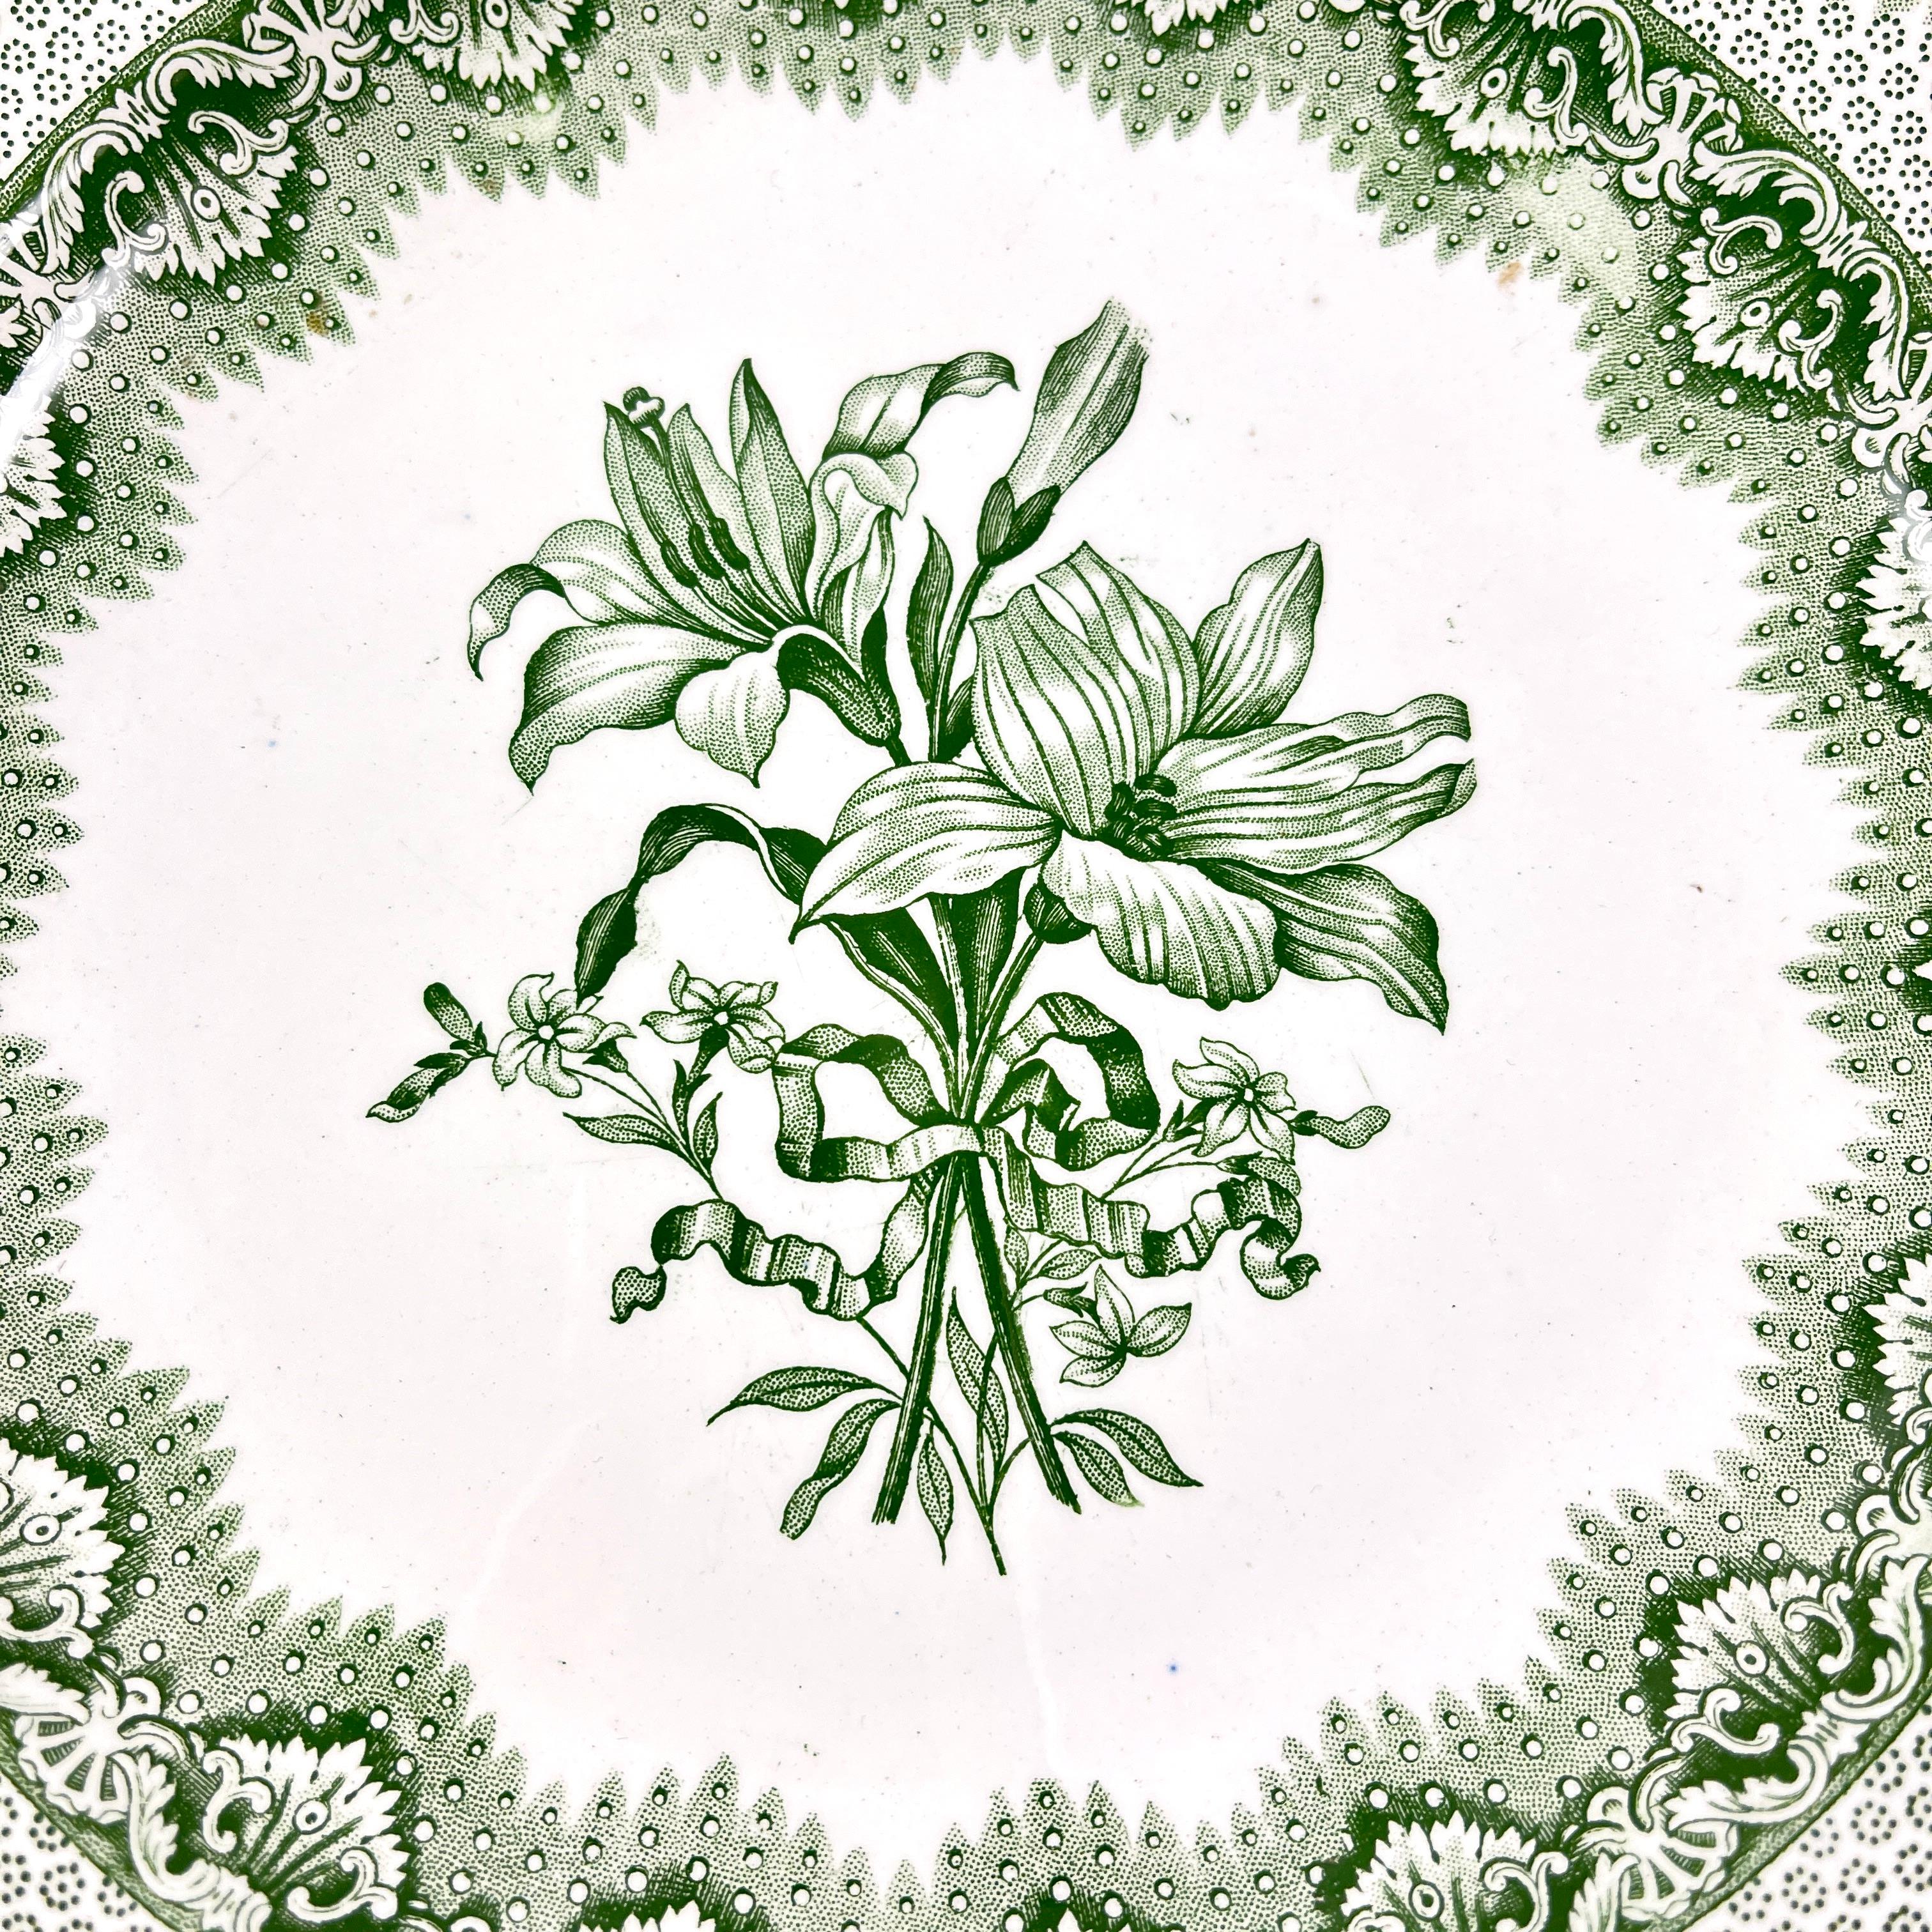 Late Spode Copeland Garrett Green Lily Luncheon Plates 1830s, Set of 6   In Good Condition For Sale In Philadelphia, PA